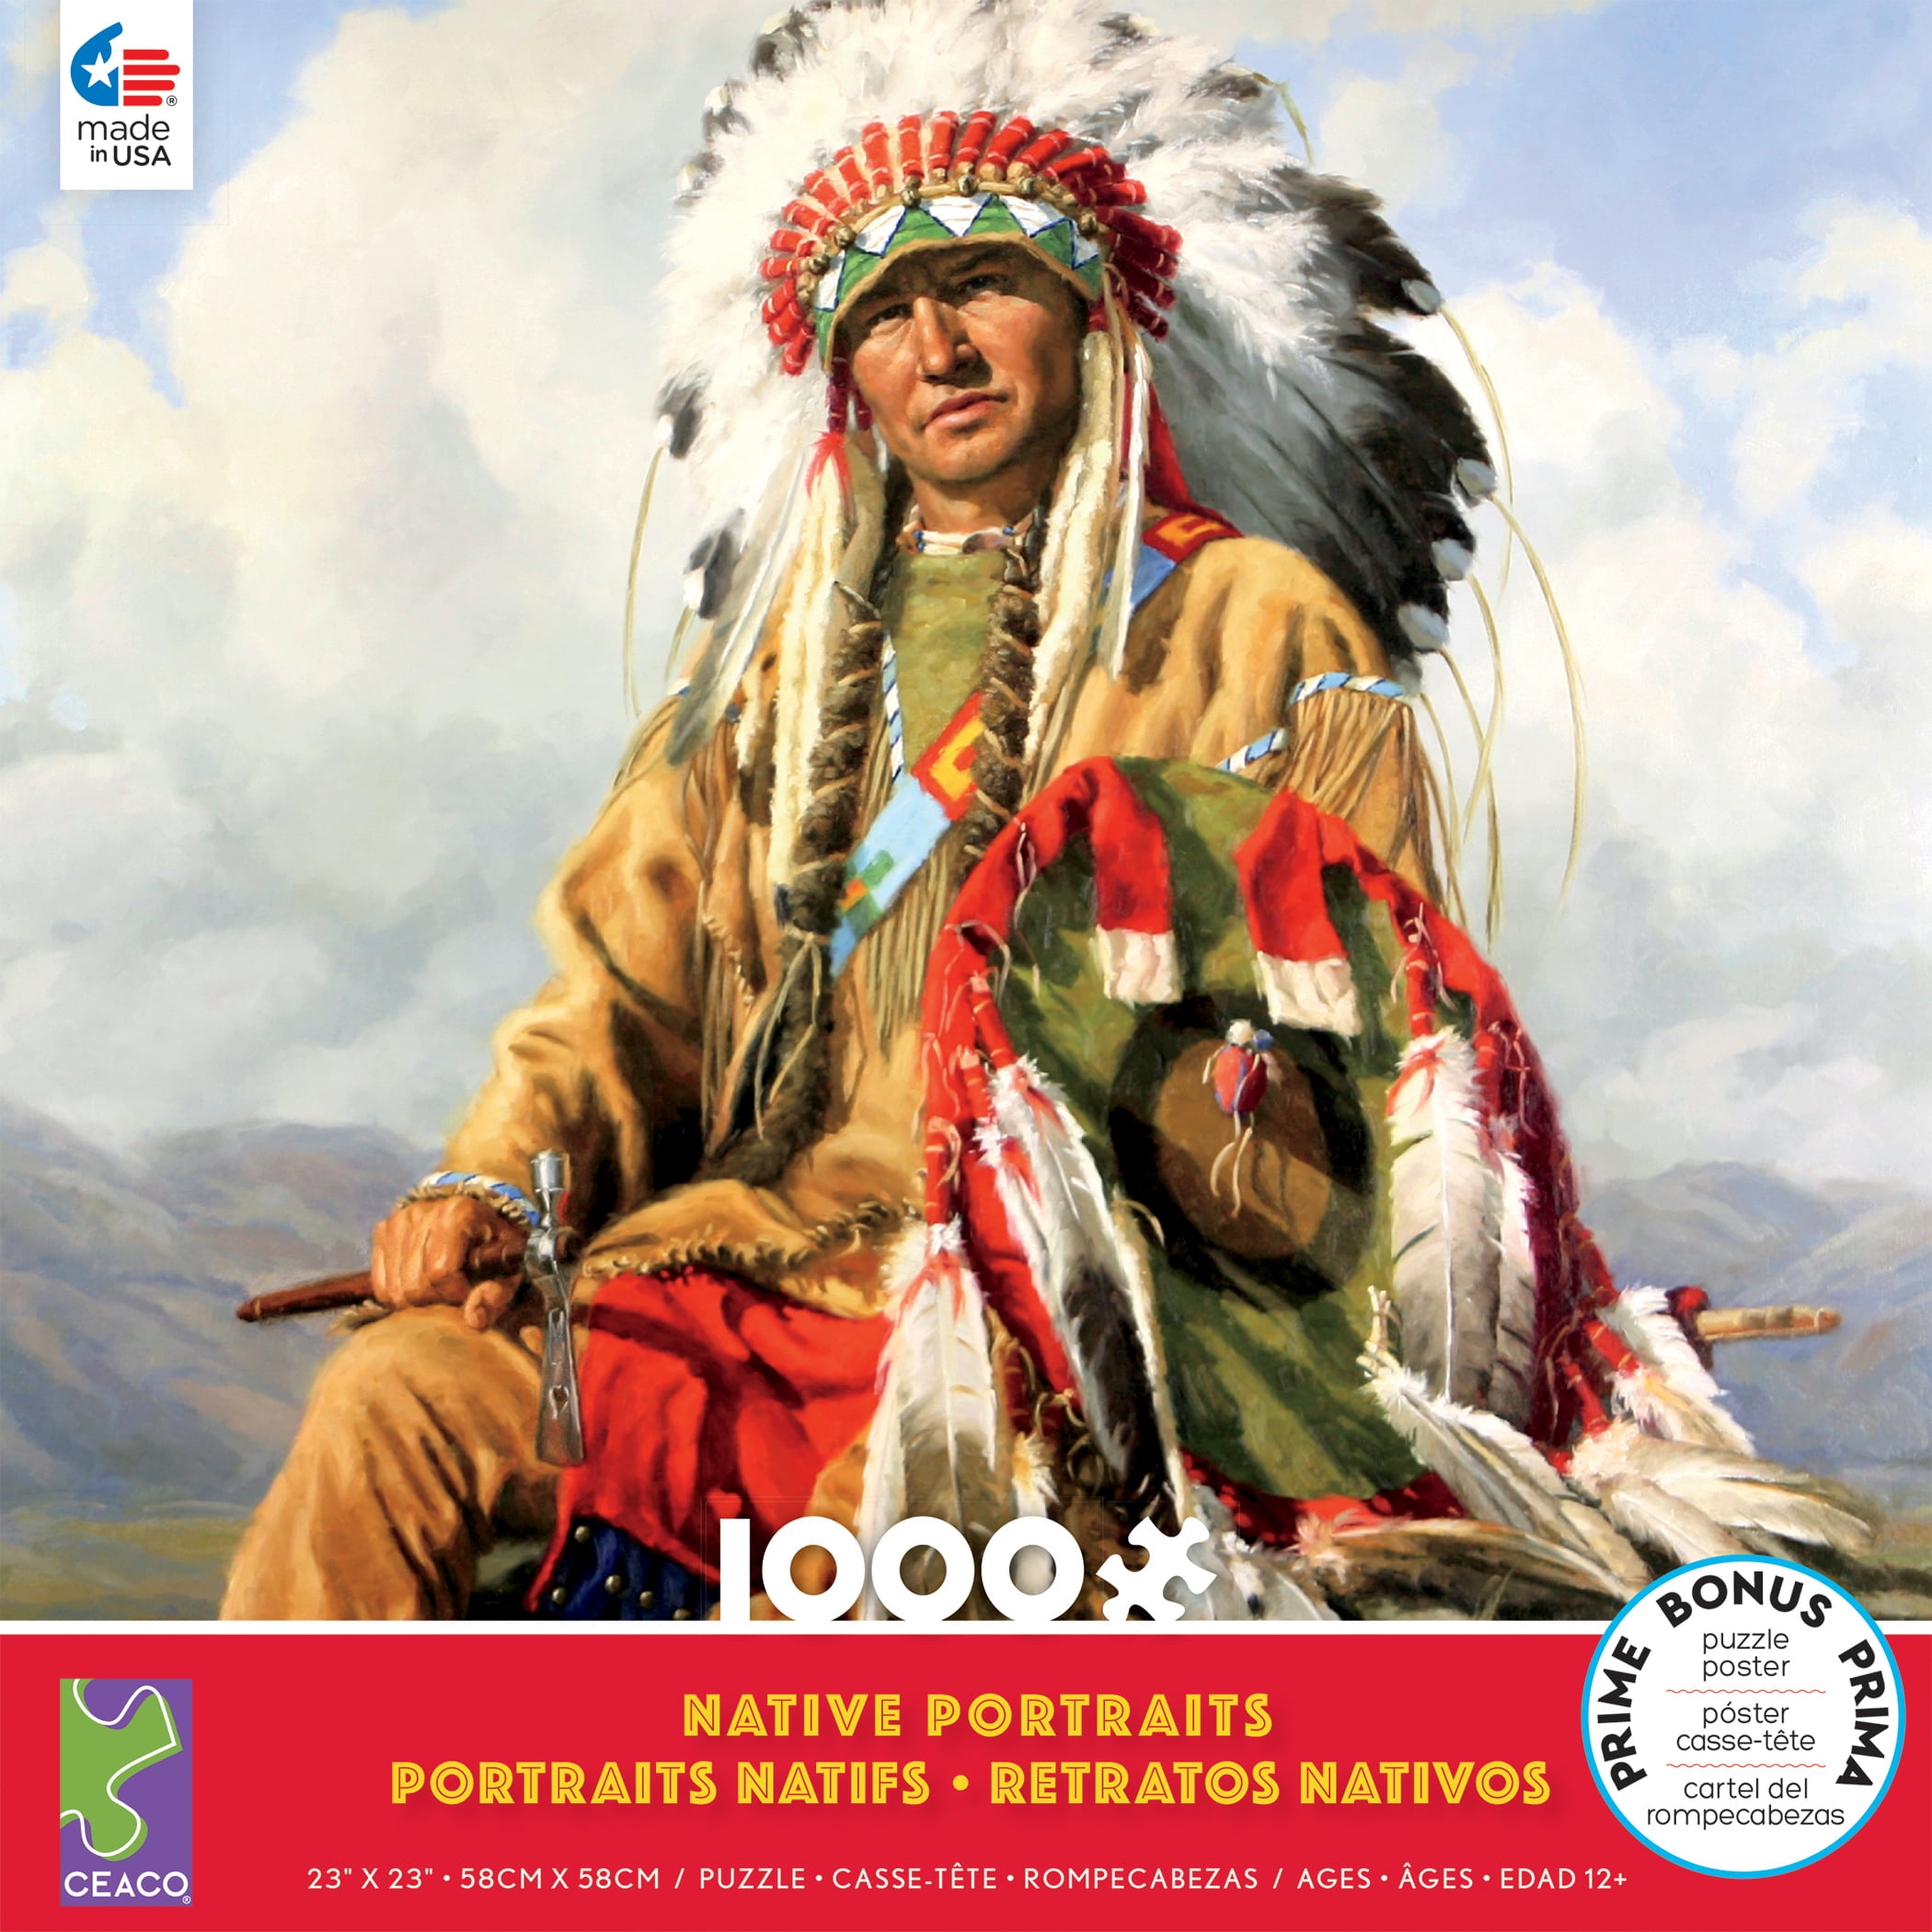 Native Portraits NEW 1000 Piece Jigsaw Puzzle Sealed Box Ceaco 23 in x 23 in 